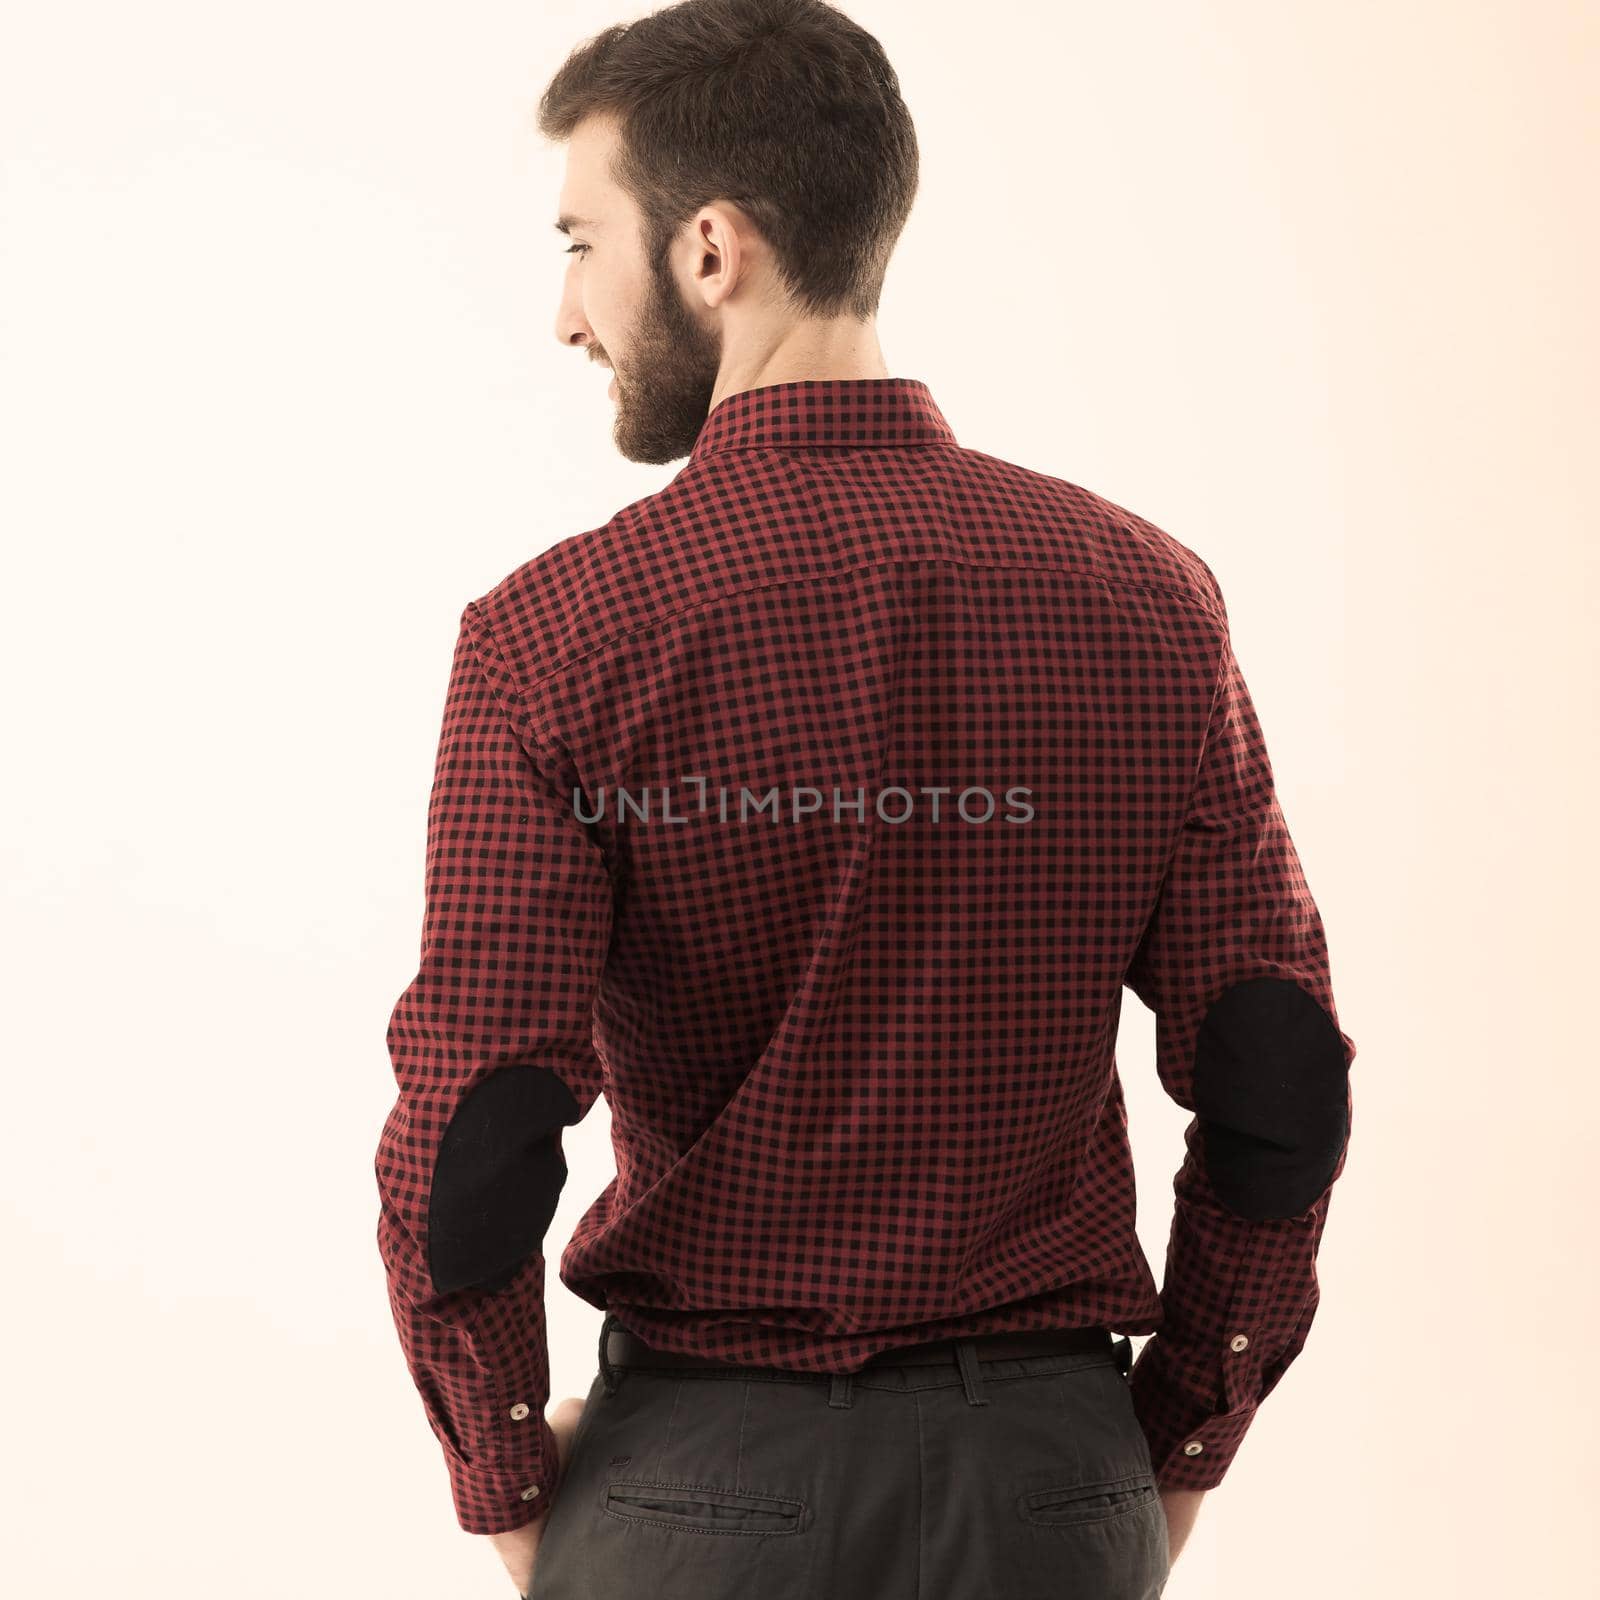 rear view - a successful Manager of a blank banner by SmartPhotoLab